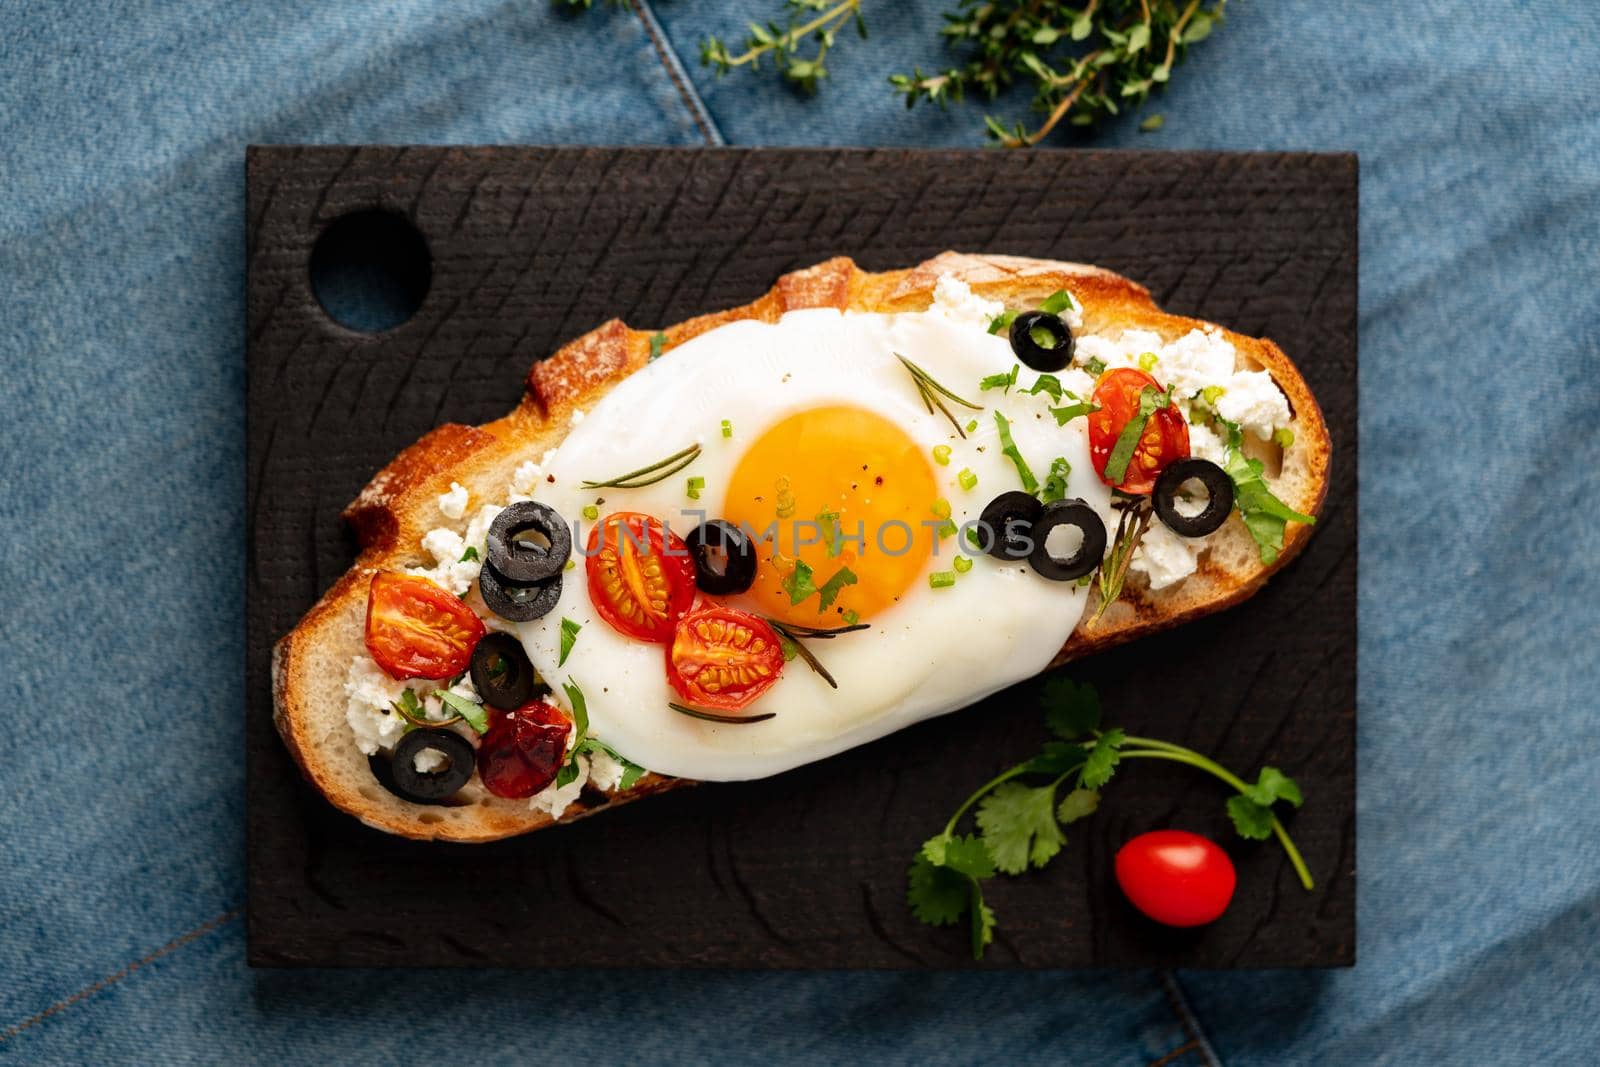 Toasted bread toast with fried eggs with yellow yolk and tomatoes, olives, sprinkled with herbs on dark wooden serving board on blue denim napkin, top view